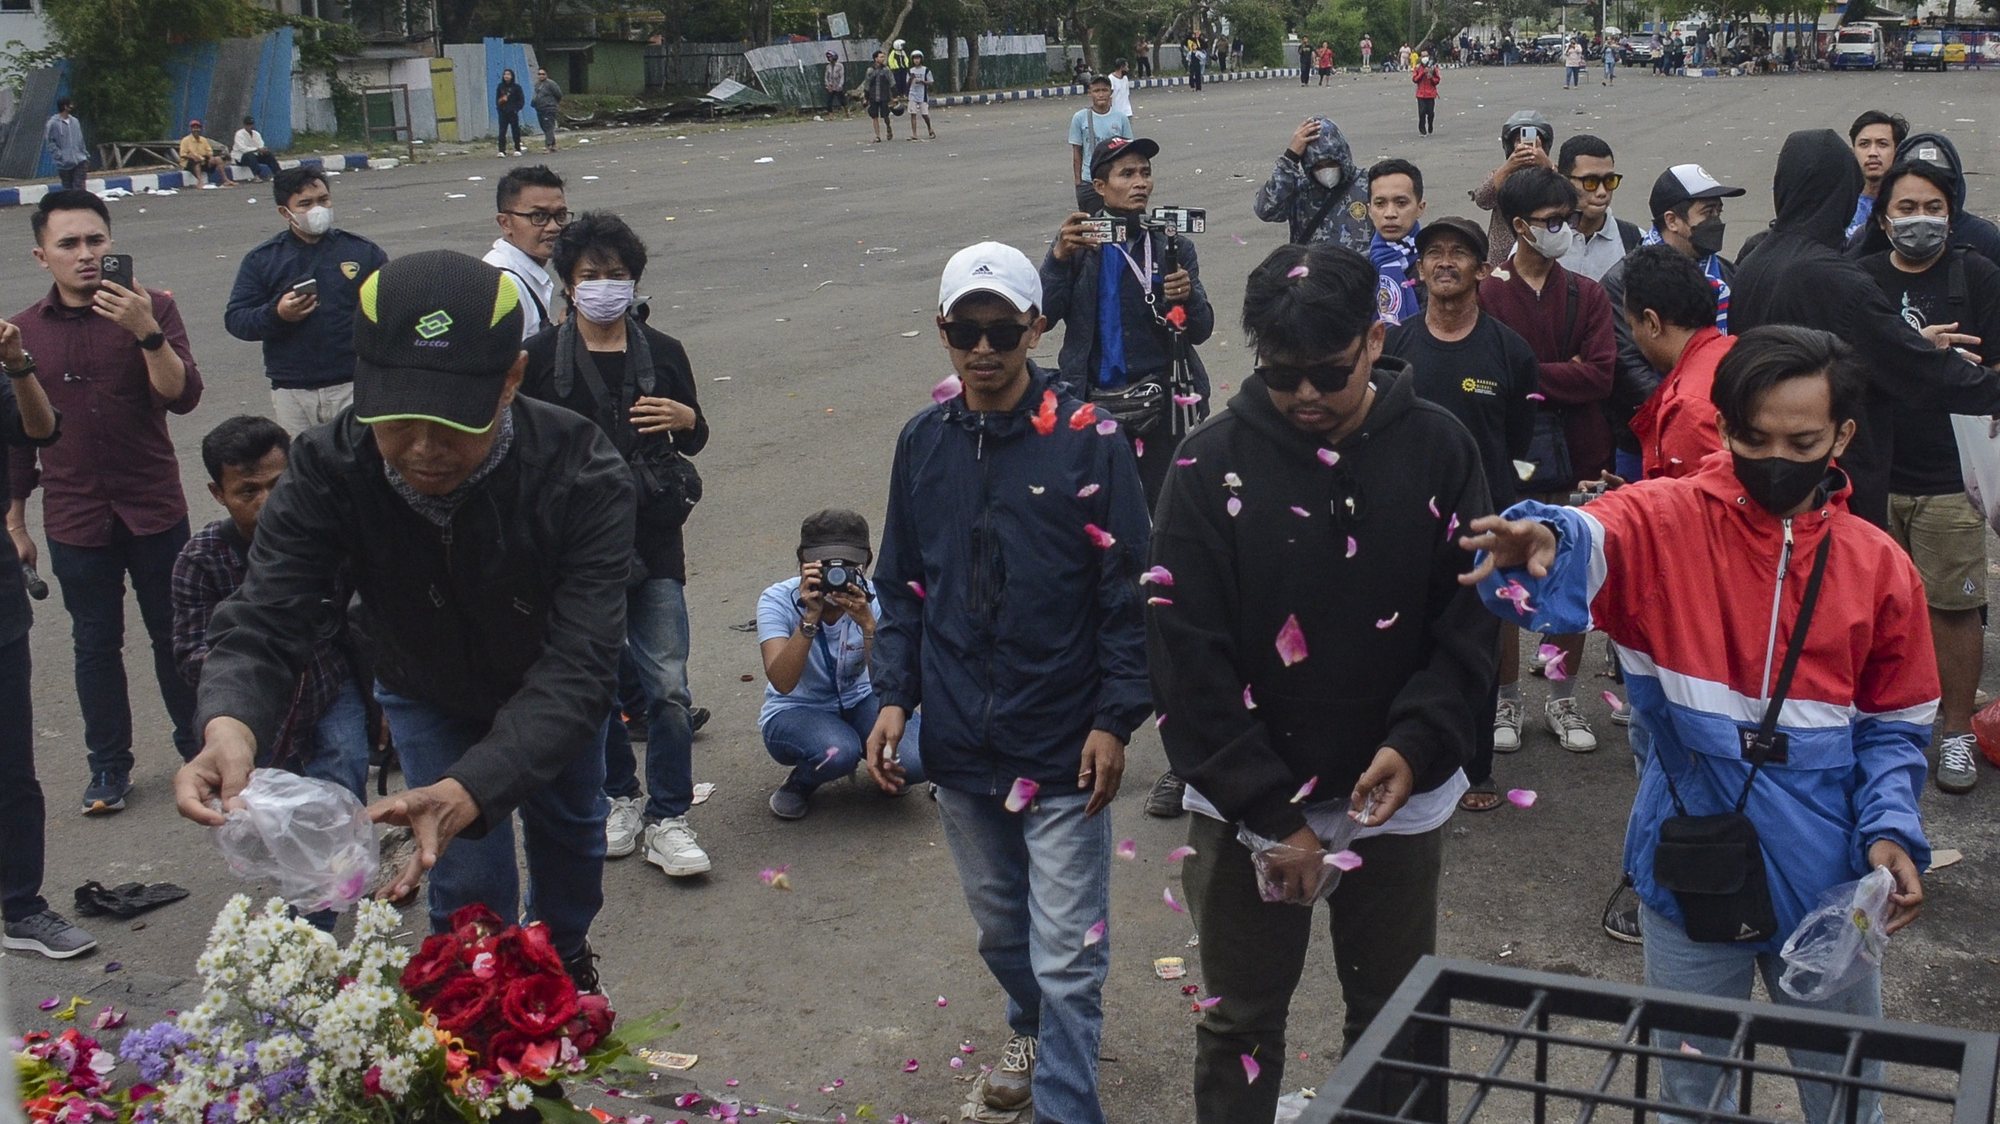 epa10219392 Local soccer club fans throw flowers as they pay condolences to the victims of the soccer match riot and stampede outside Kanjuruhan Stadium in Malang, East Java, Indonesia, 02 October 2022. Indonesia&#039;s National Police Chief General Listyo Sigid Prabowo announced that at least 125 people, including police officers, were killed after Indonesian soccer fans entered the pitch causing panic and stampede, after the match between Arema FC and Persebaya Surabaya in East Java on 01 October. The Football Association of Indonesia temporarily suspended the 2022/2023 Liga 1 competition for one week, and prohibited Arema FC from hosting for the rest of the competition this season.  EPA/SANDI SADEWA